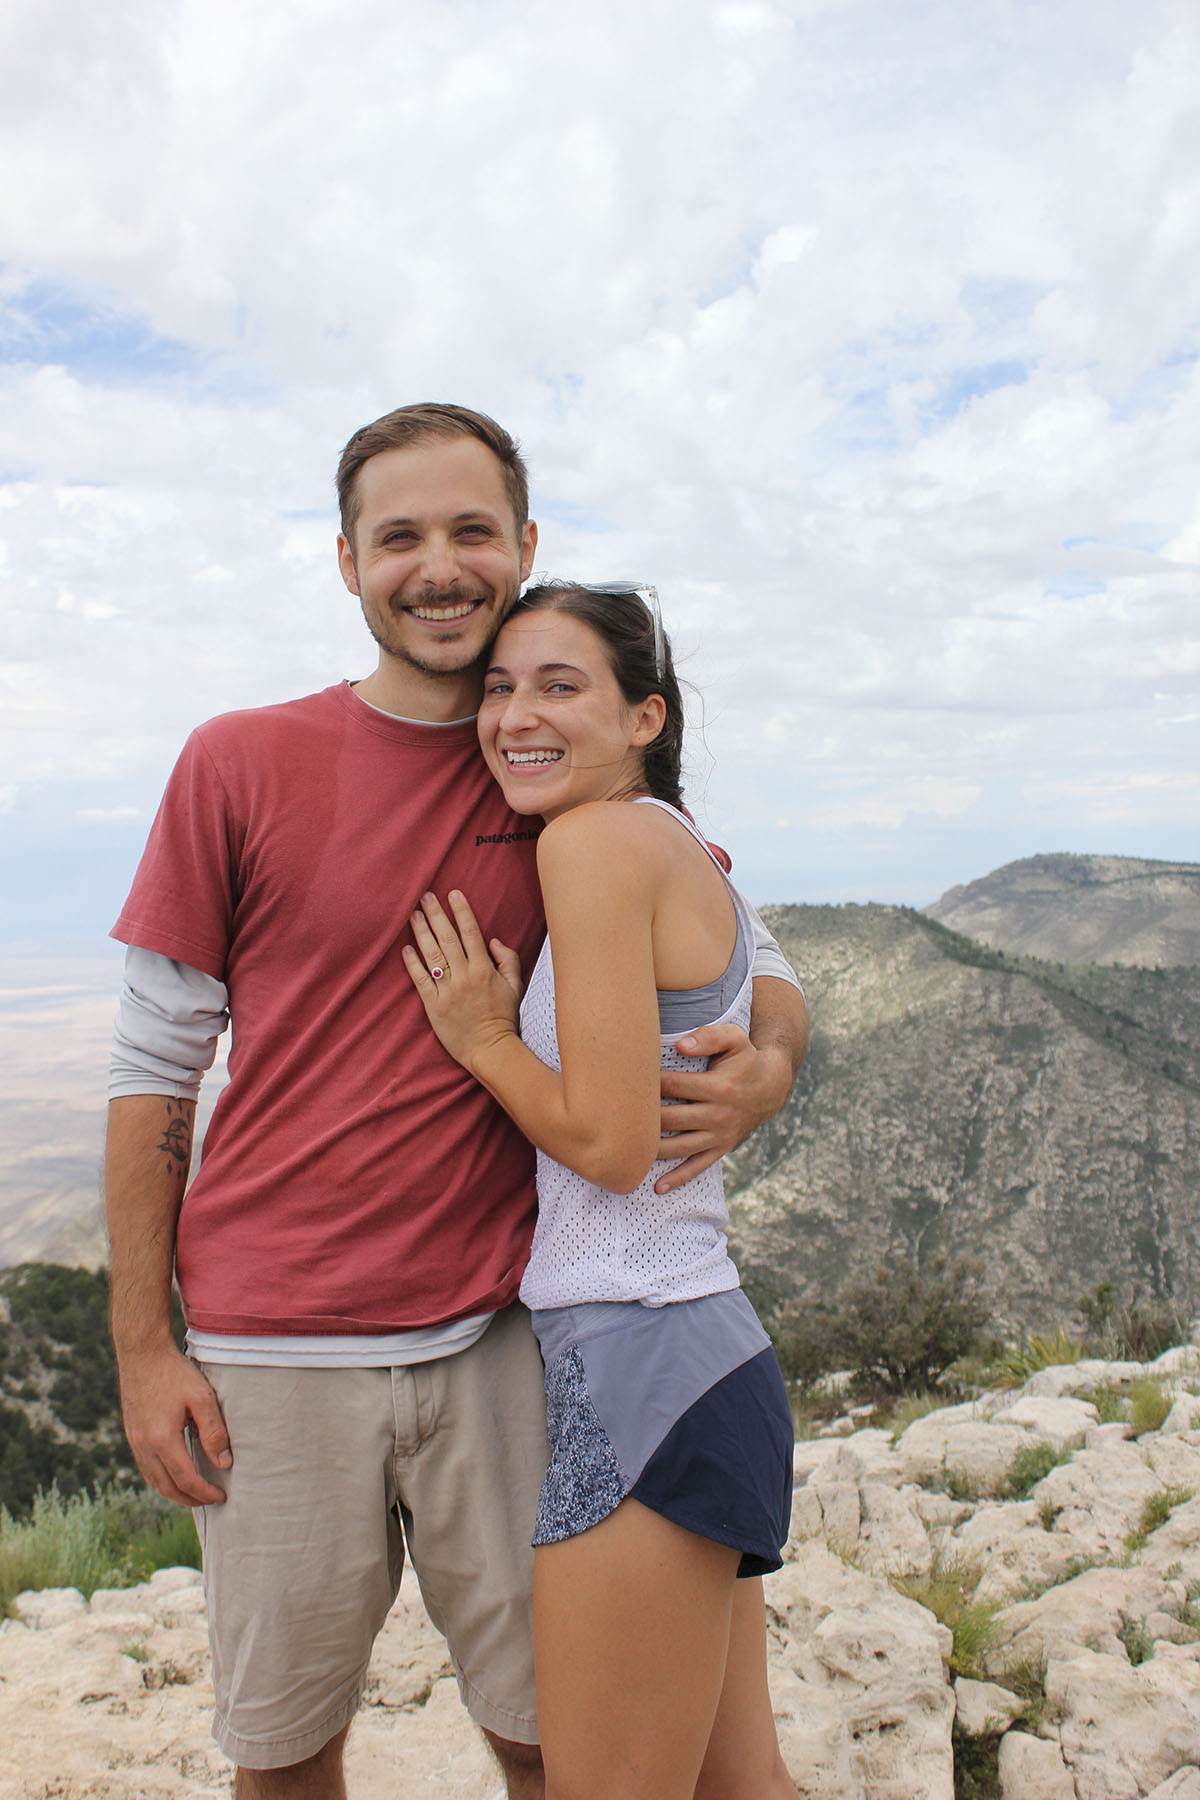 The newly-engaged couple pose at the top of Guadalupe Peak